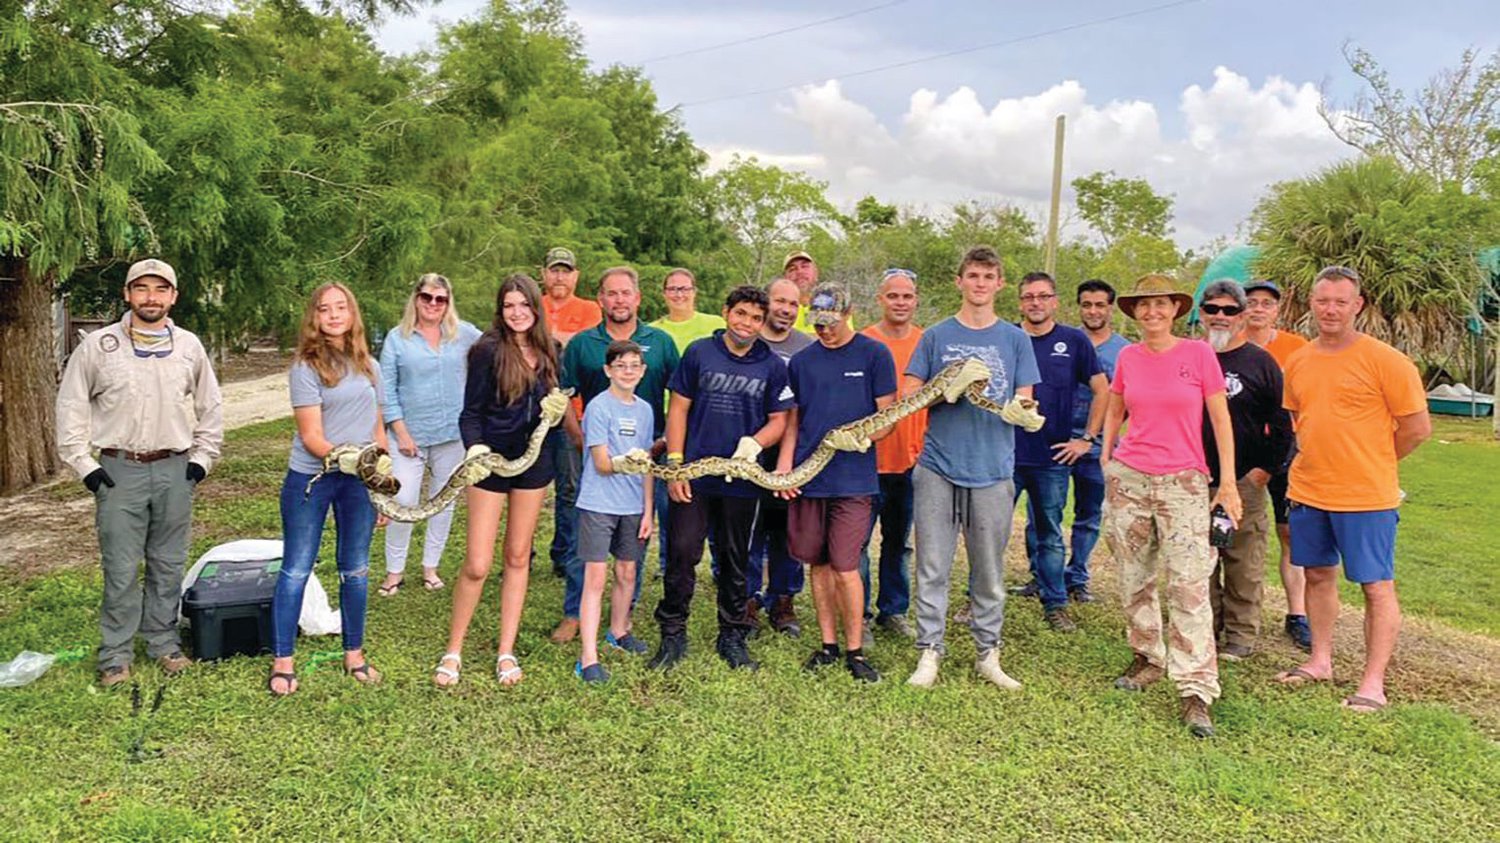 Python Patrol is a no-cost training program that aims to create a network of individuals throughout Florida who know how to identify Burmese pythons and report sightings.